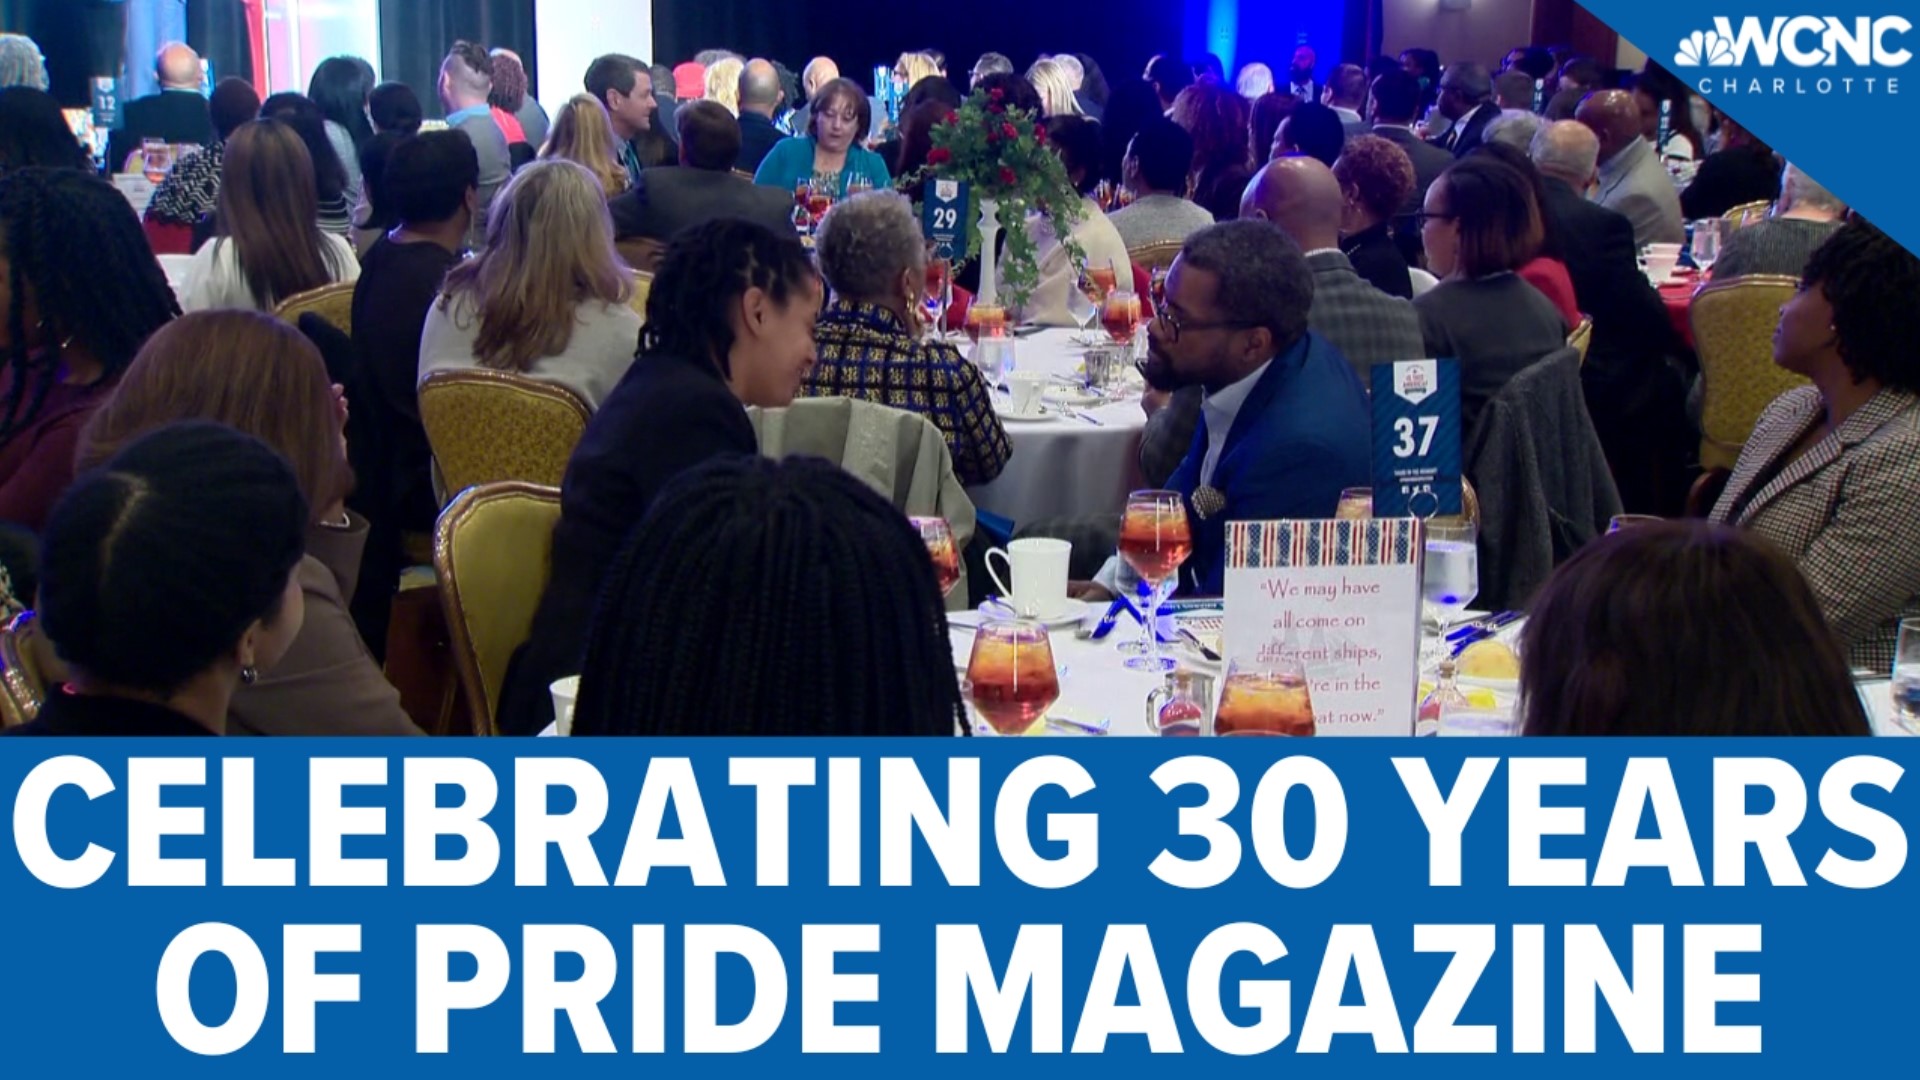 Pride magazine is celebrating 30 years of making a difference.